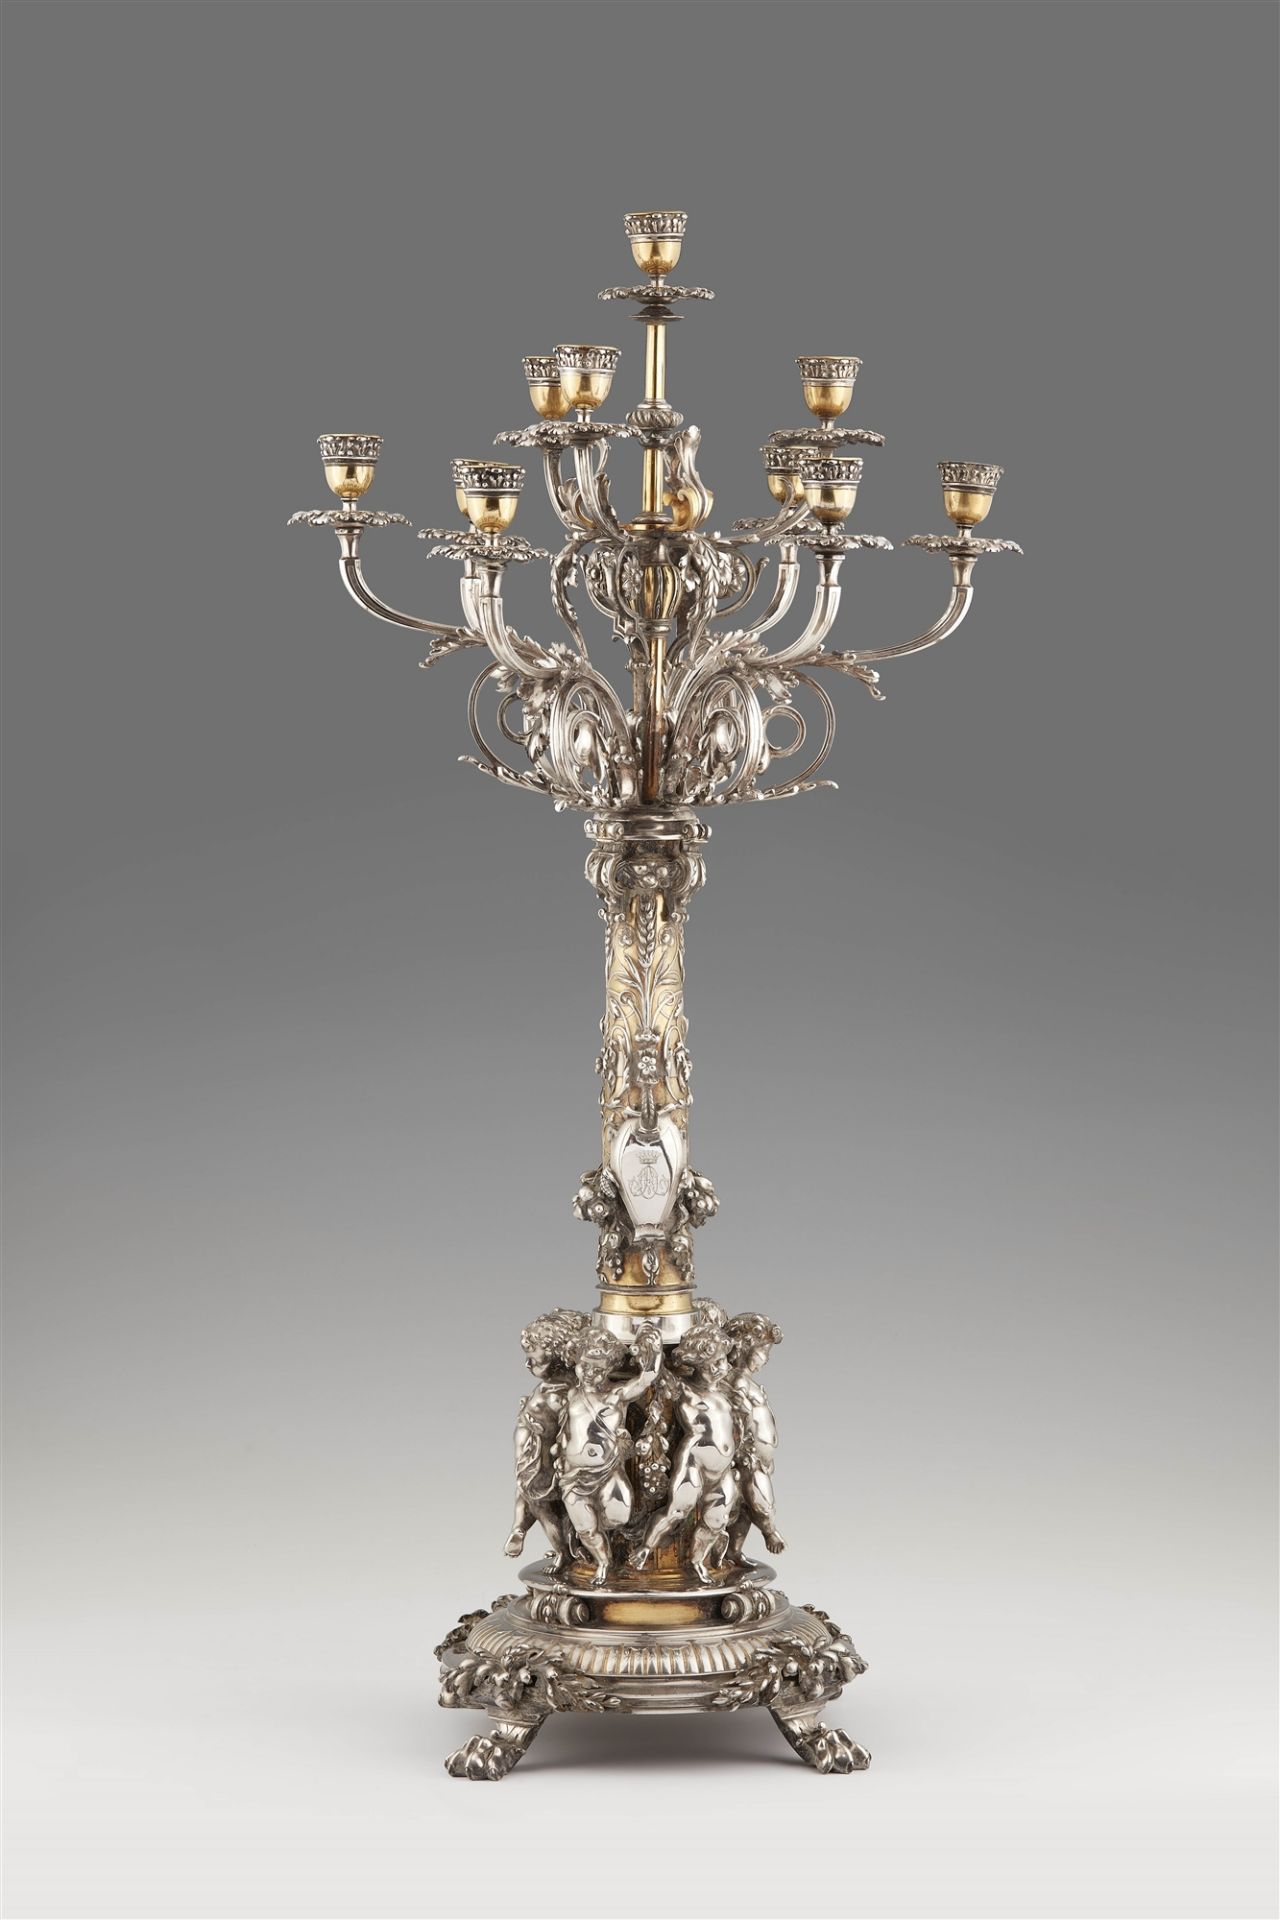 A silver and gold plated bronze candelabra made for Baron Abraham Oppenheim